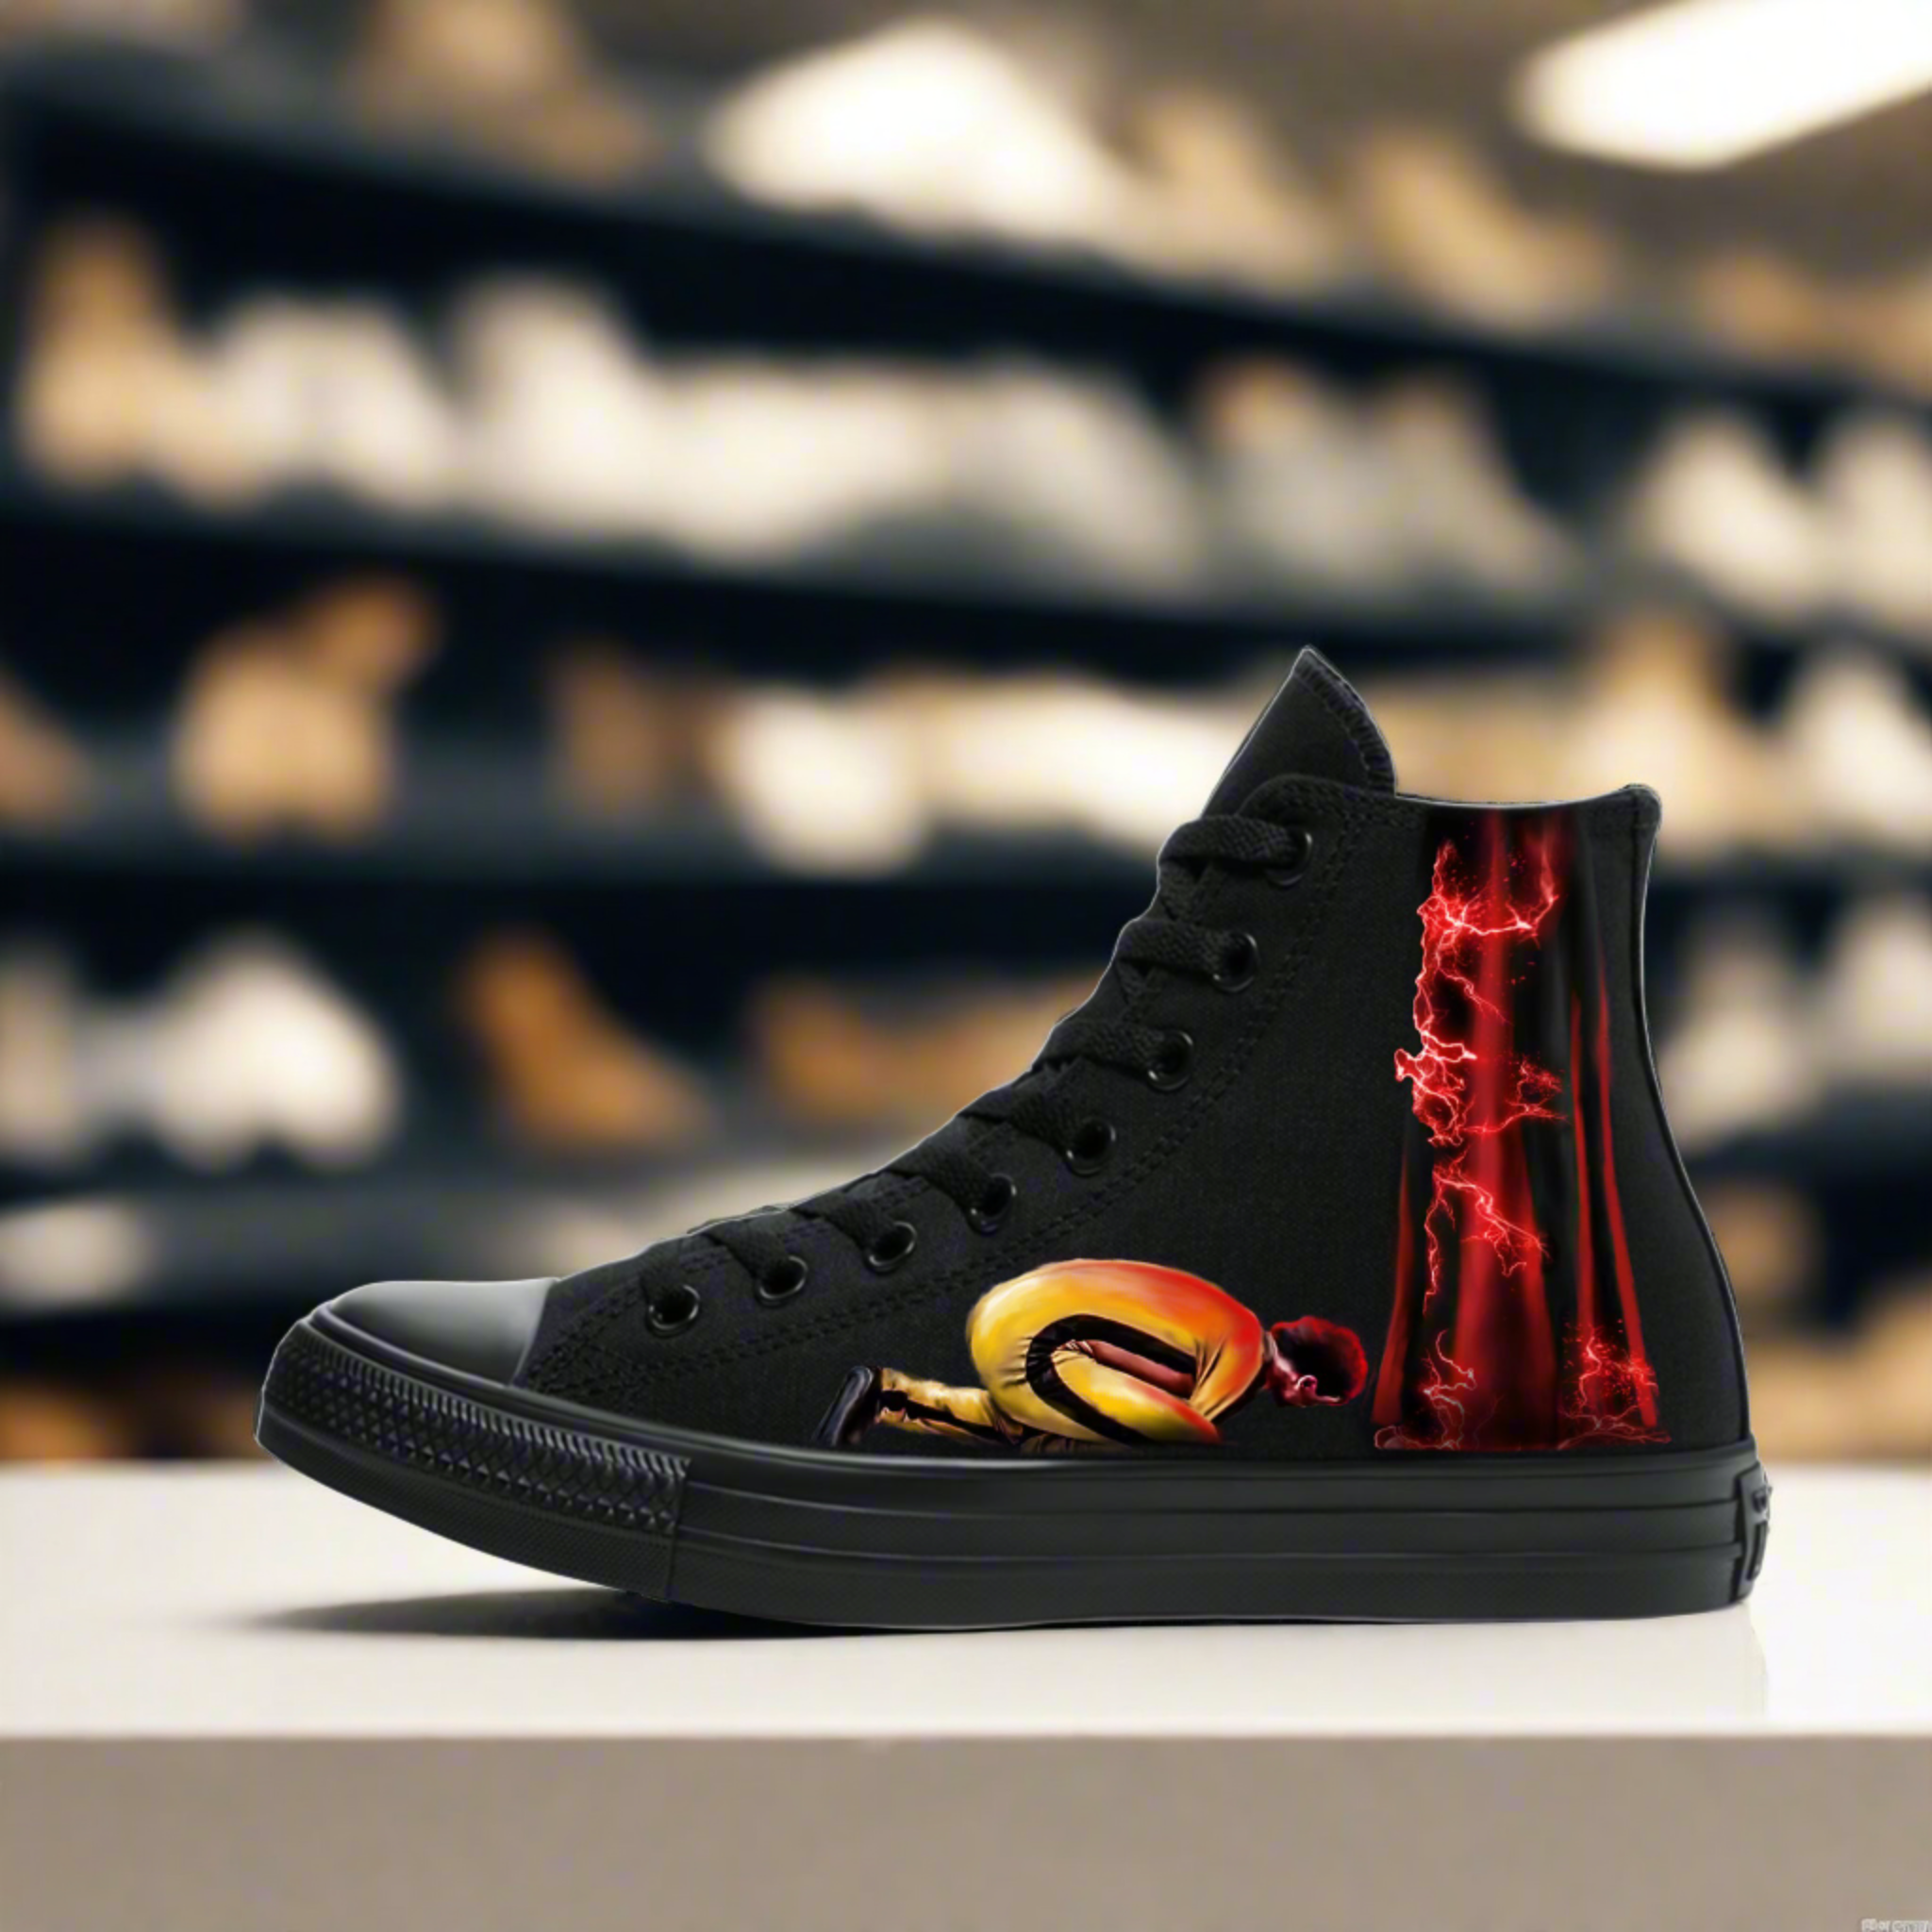 Celebrate the Legacy of The Last Dragon with Styx Kicks' Exclusive Collection